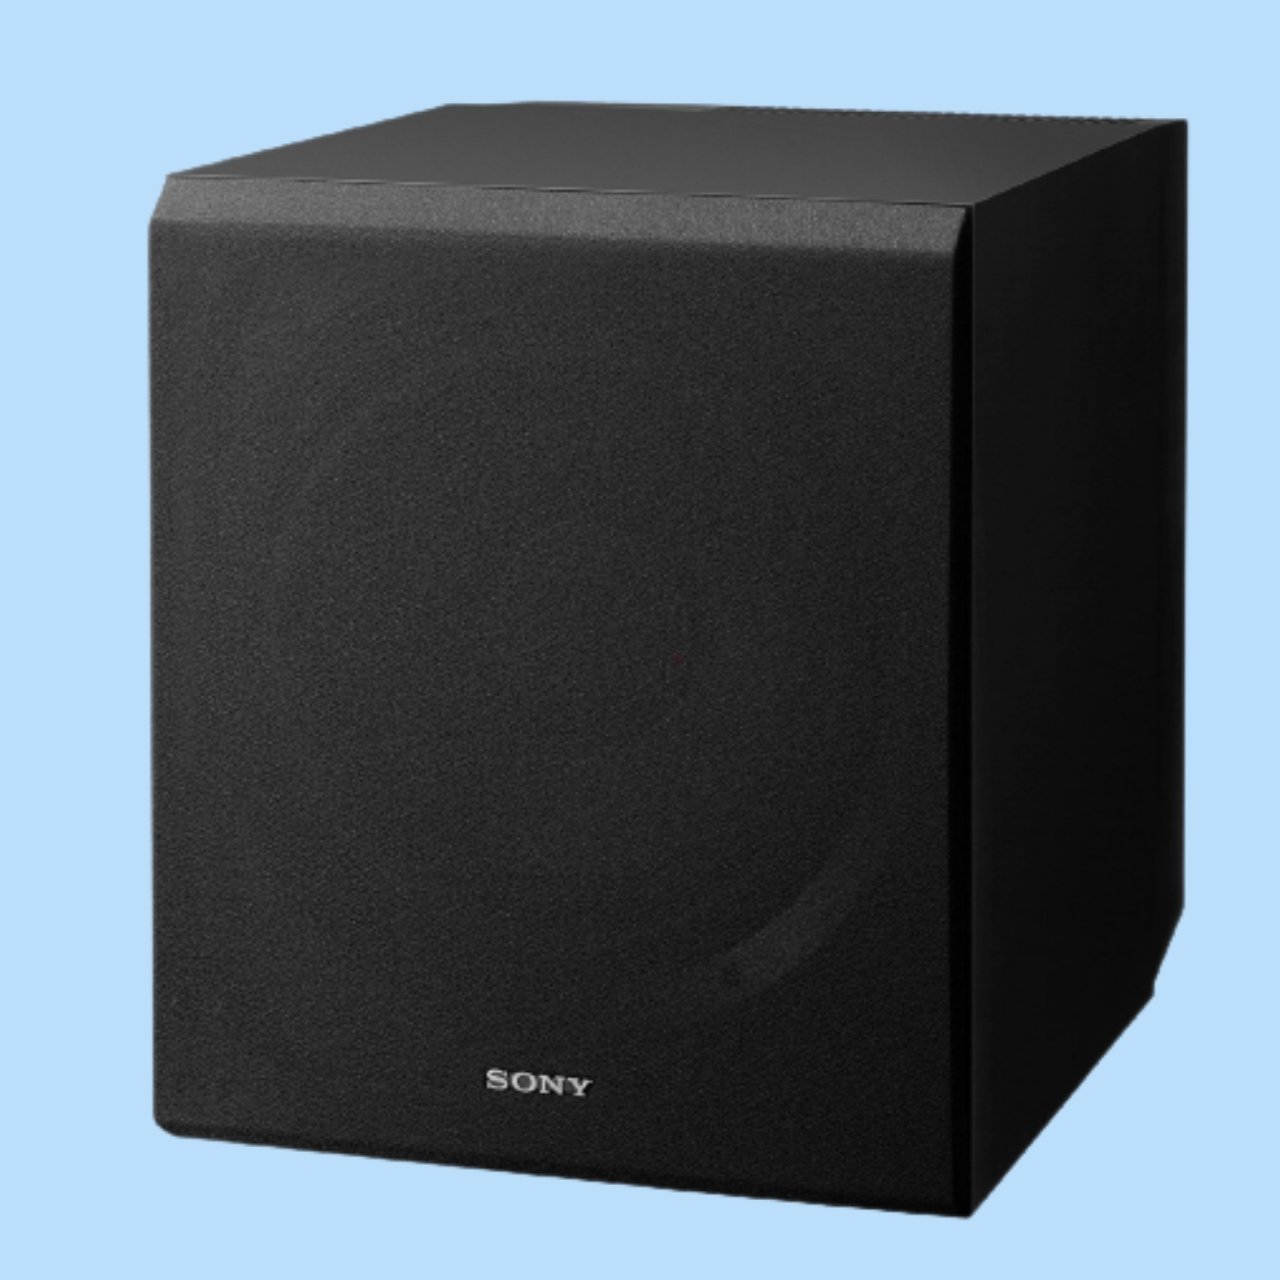 4 Ways To Connect Subwoofer To Receiver Without Subwoofer Output